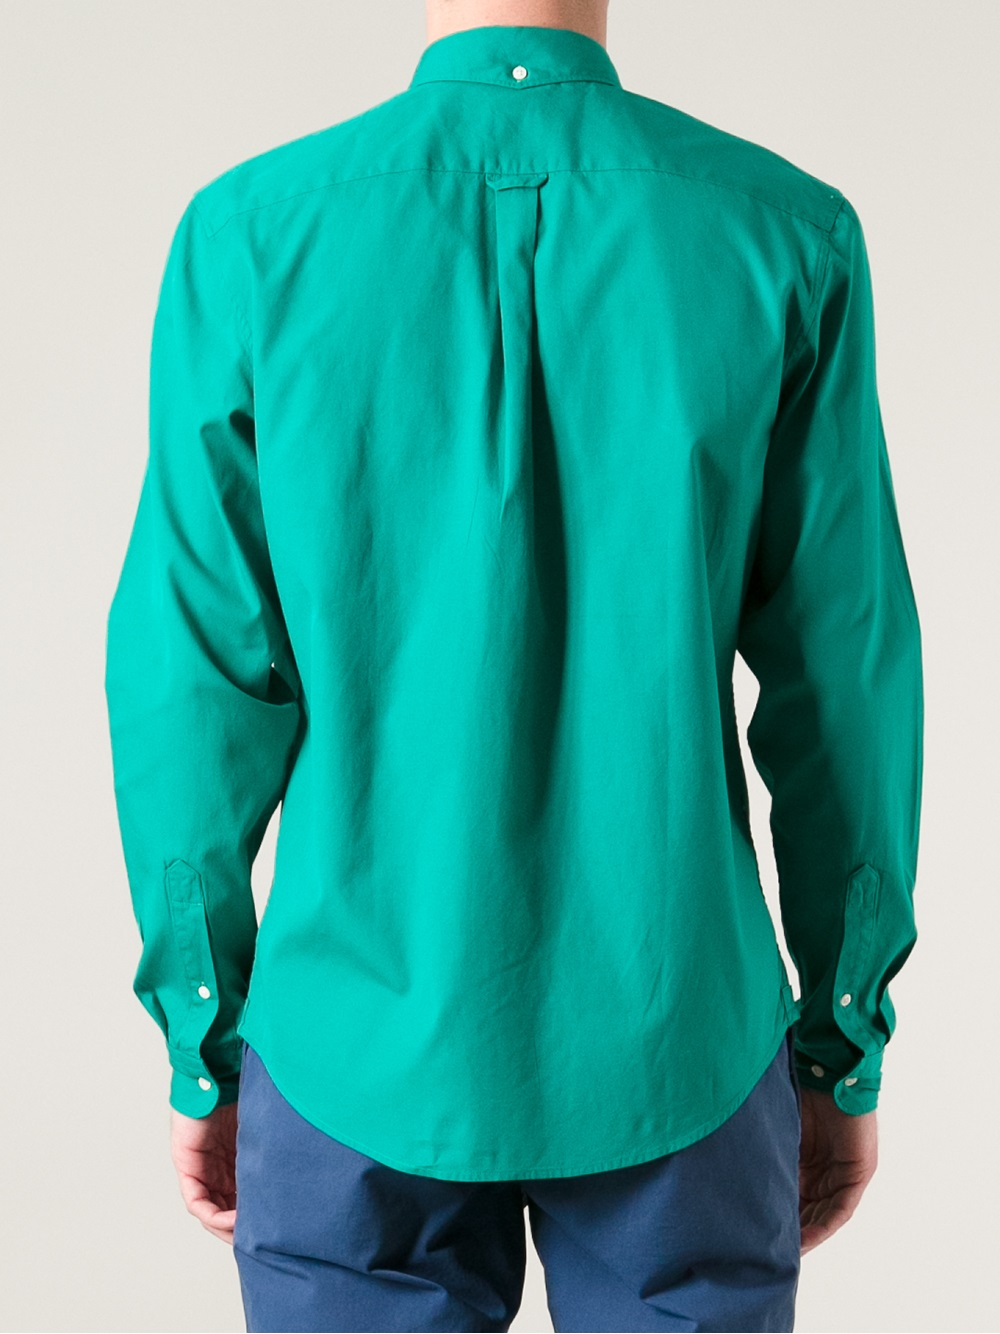 Lacoste L!ive Long Sleeve Shirt in Green for Men - Lyst